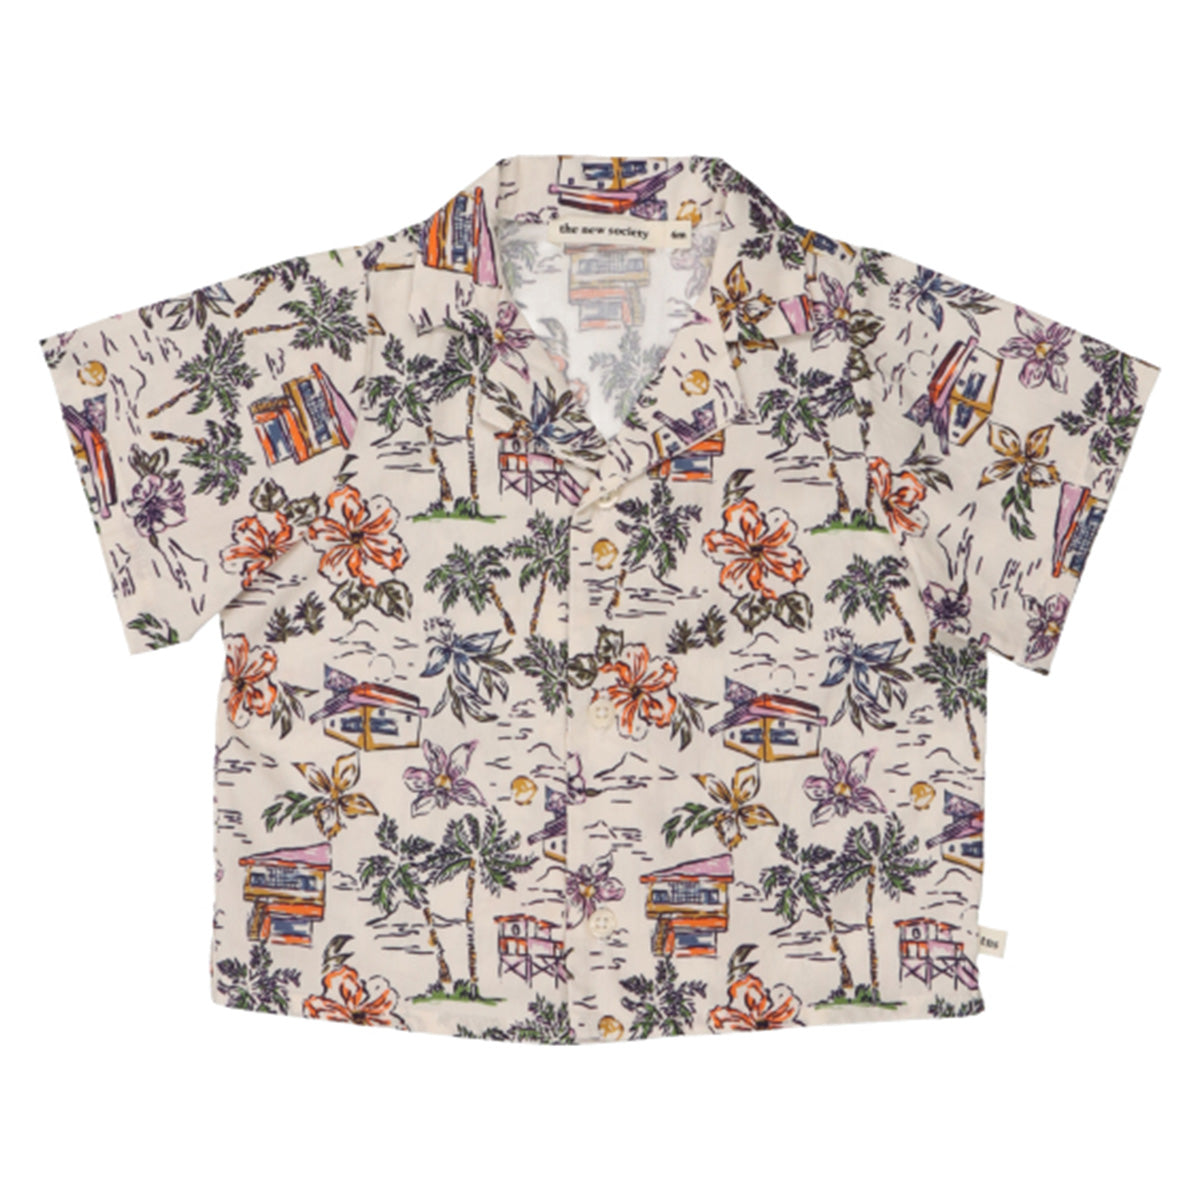 The Belmont Baby Shirt from The New Society. A short-sleeved delight with a playful print. 